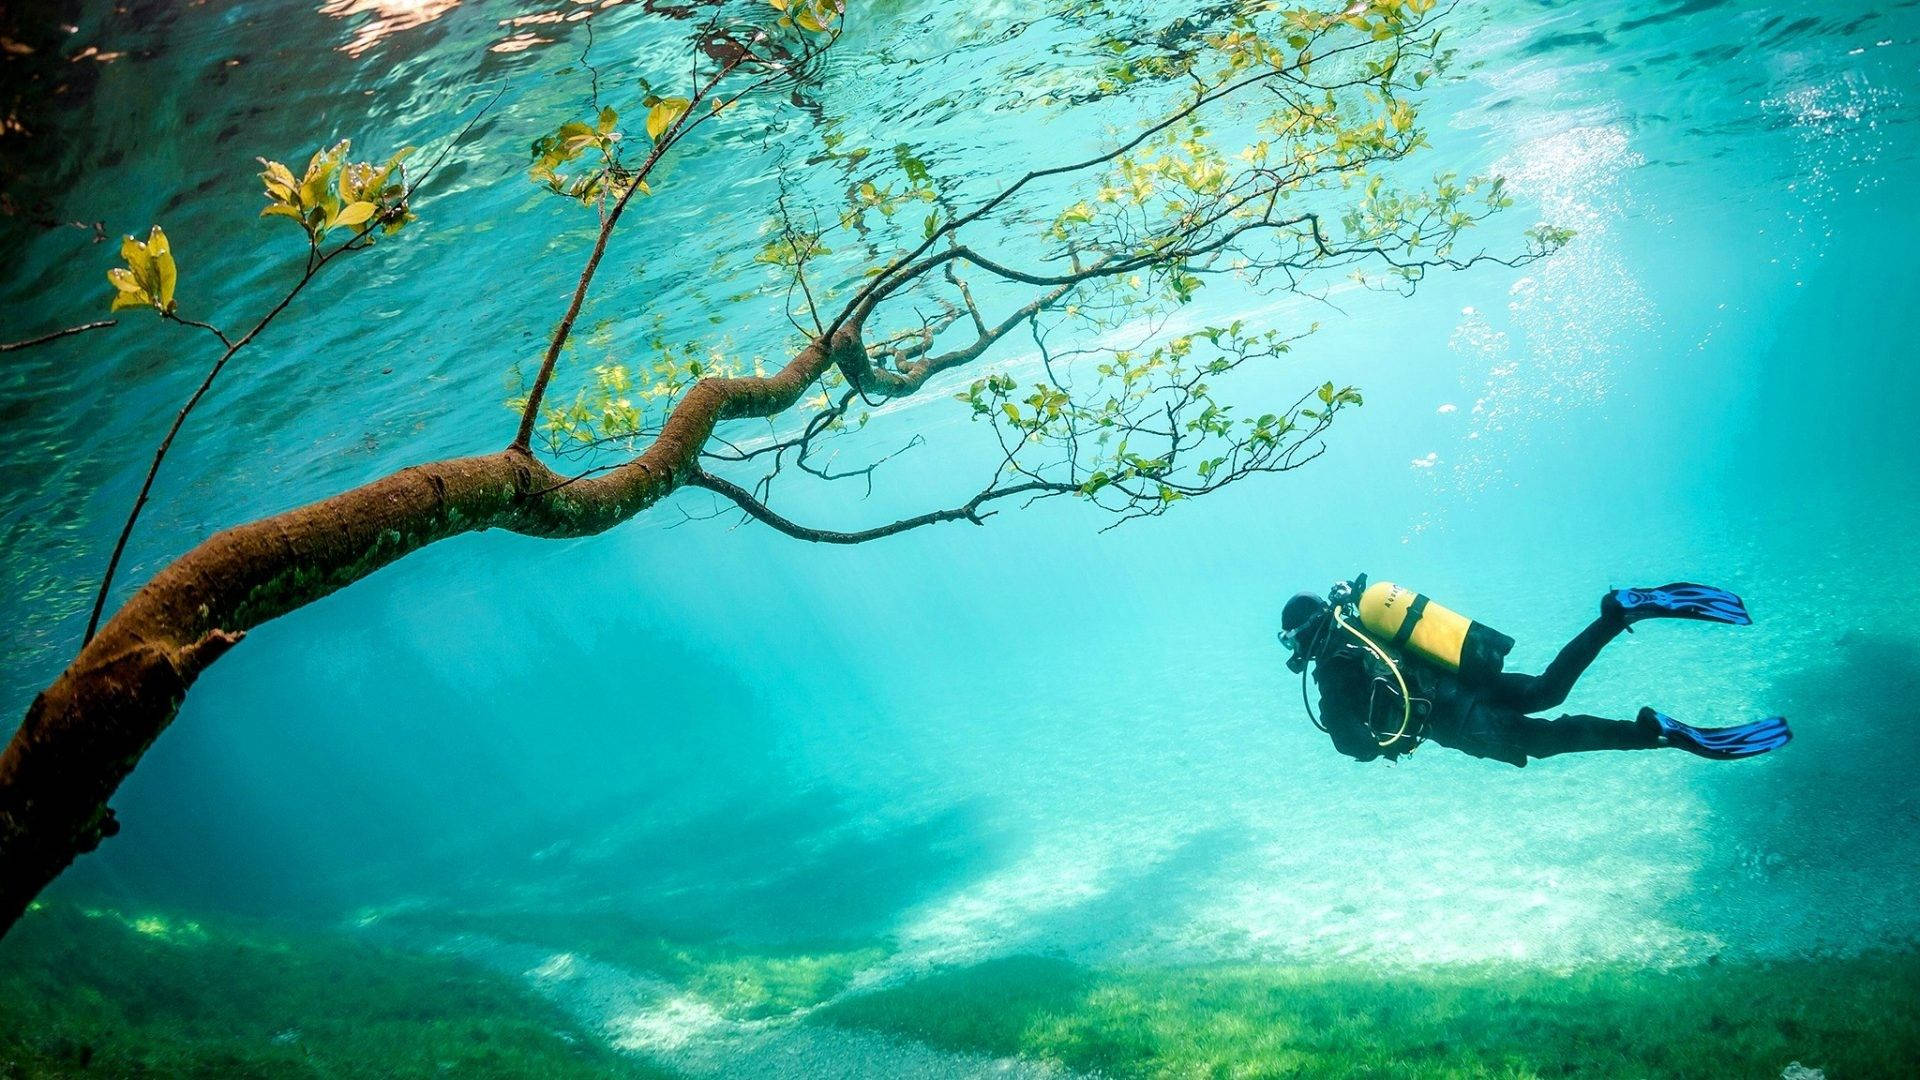 Scuba Diving With An Underwater Tree Wallpaper